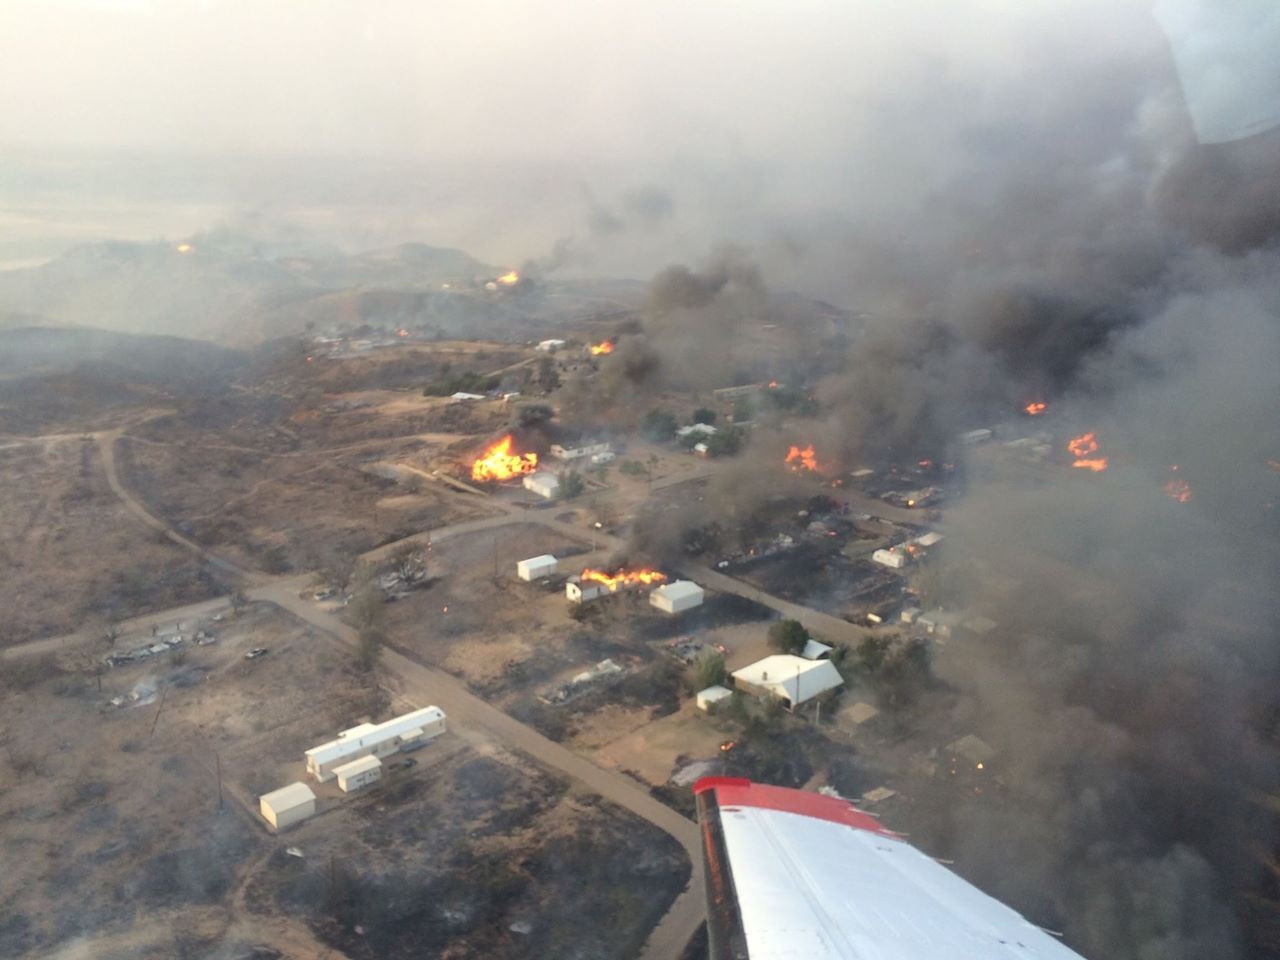 Aerial view of a wildfire in a community with smoke throughout the sky